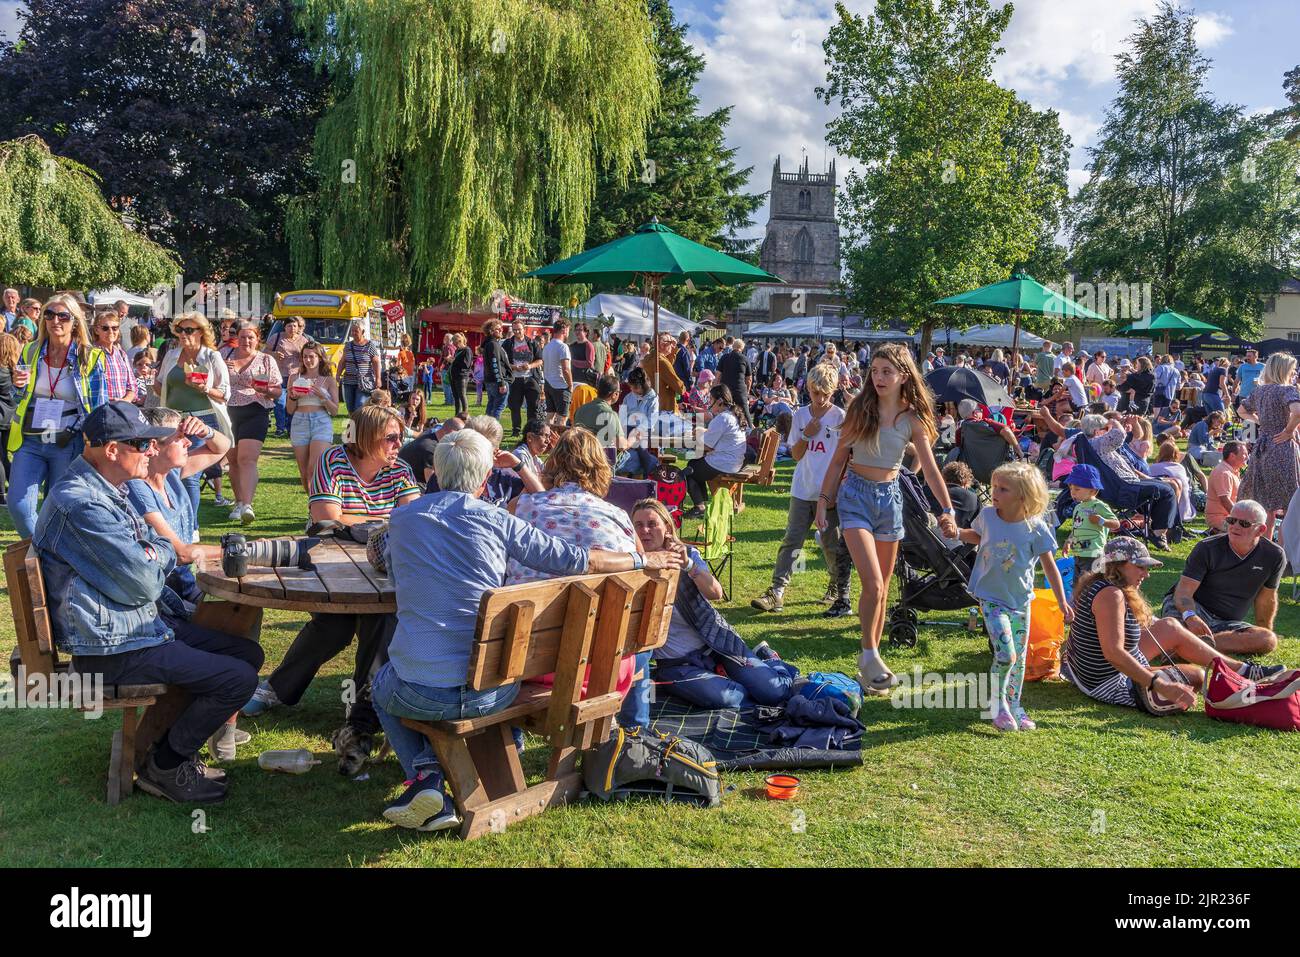 A typical English setting for the ballon festival in Oswestry Shropshire with crowds of families enjoying the sunshine in Cae Glas park. Stock Photo